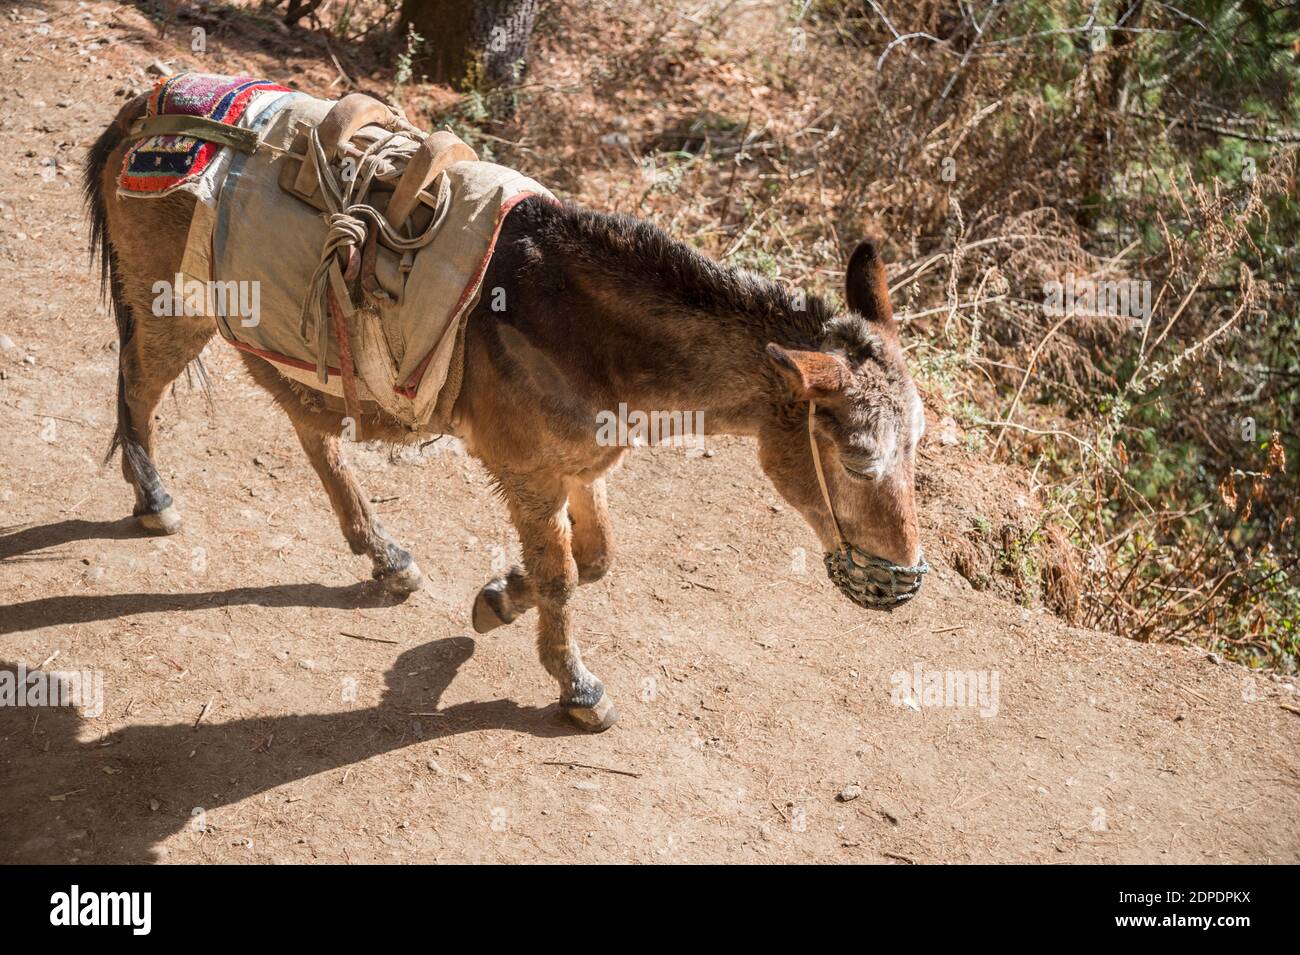 High Angle View Of Mule On Land Stock Photo - Alamy